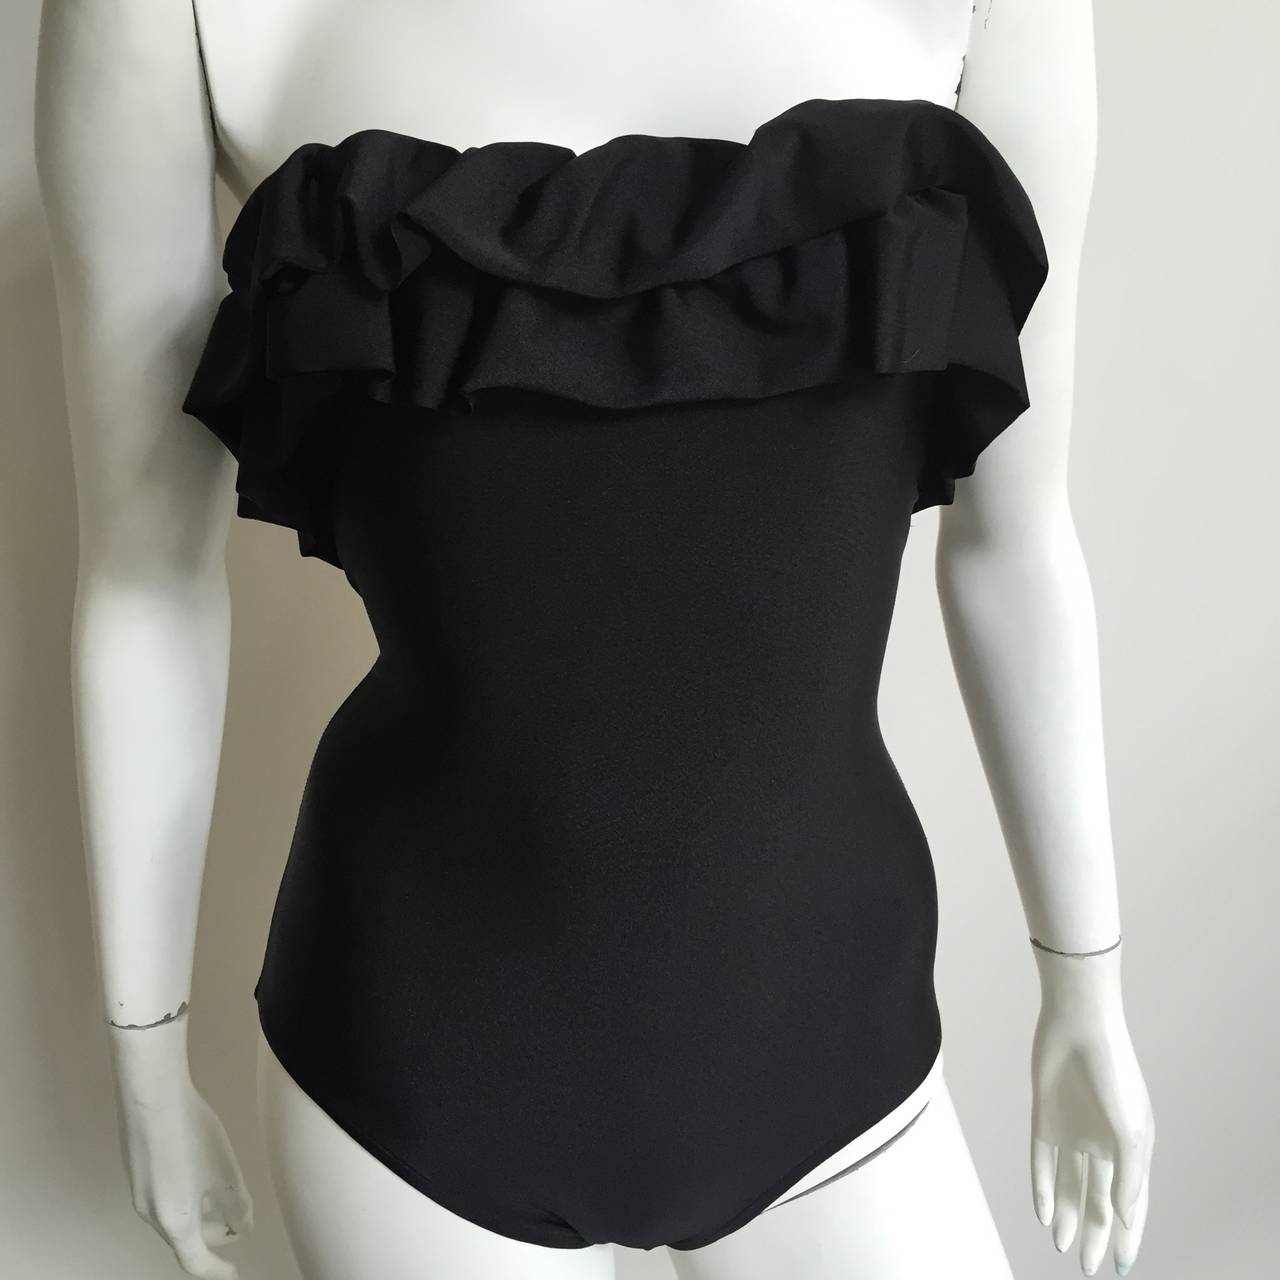 Bill Blass 1970s black ruffled one piece swimsuit original size 8 but fits like a modern size 4. Mannequin is a true size 4 and as you can see swimsuit fits to perfection. The strap that wraps around neck is missing as shown in photo with button but